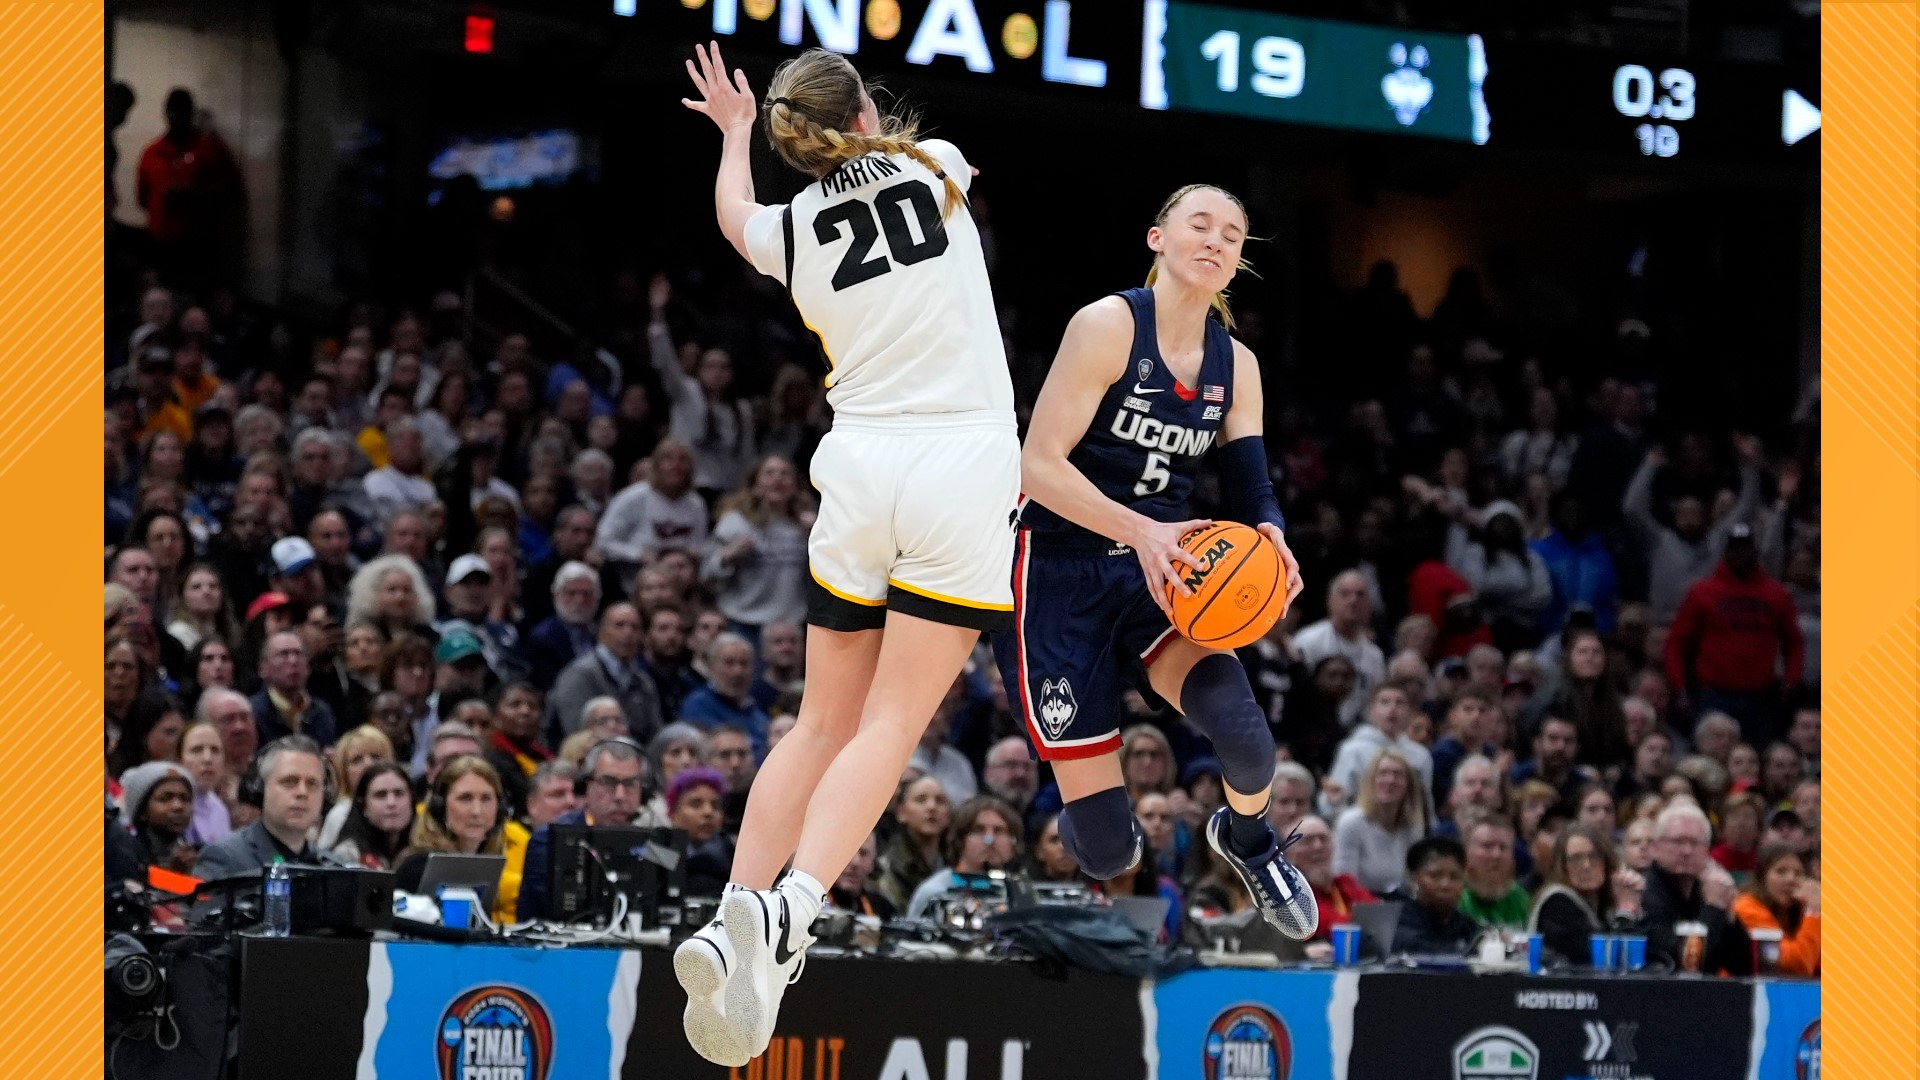 The previous women’s hoops mark was 12.3 million for last Monday’s Iowa-LSU game in the Elite Eight.